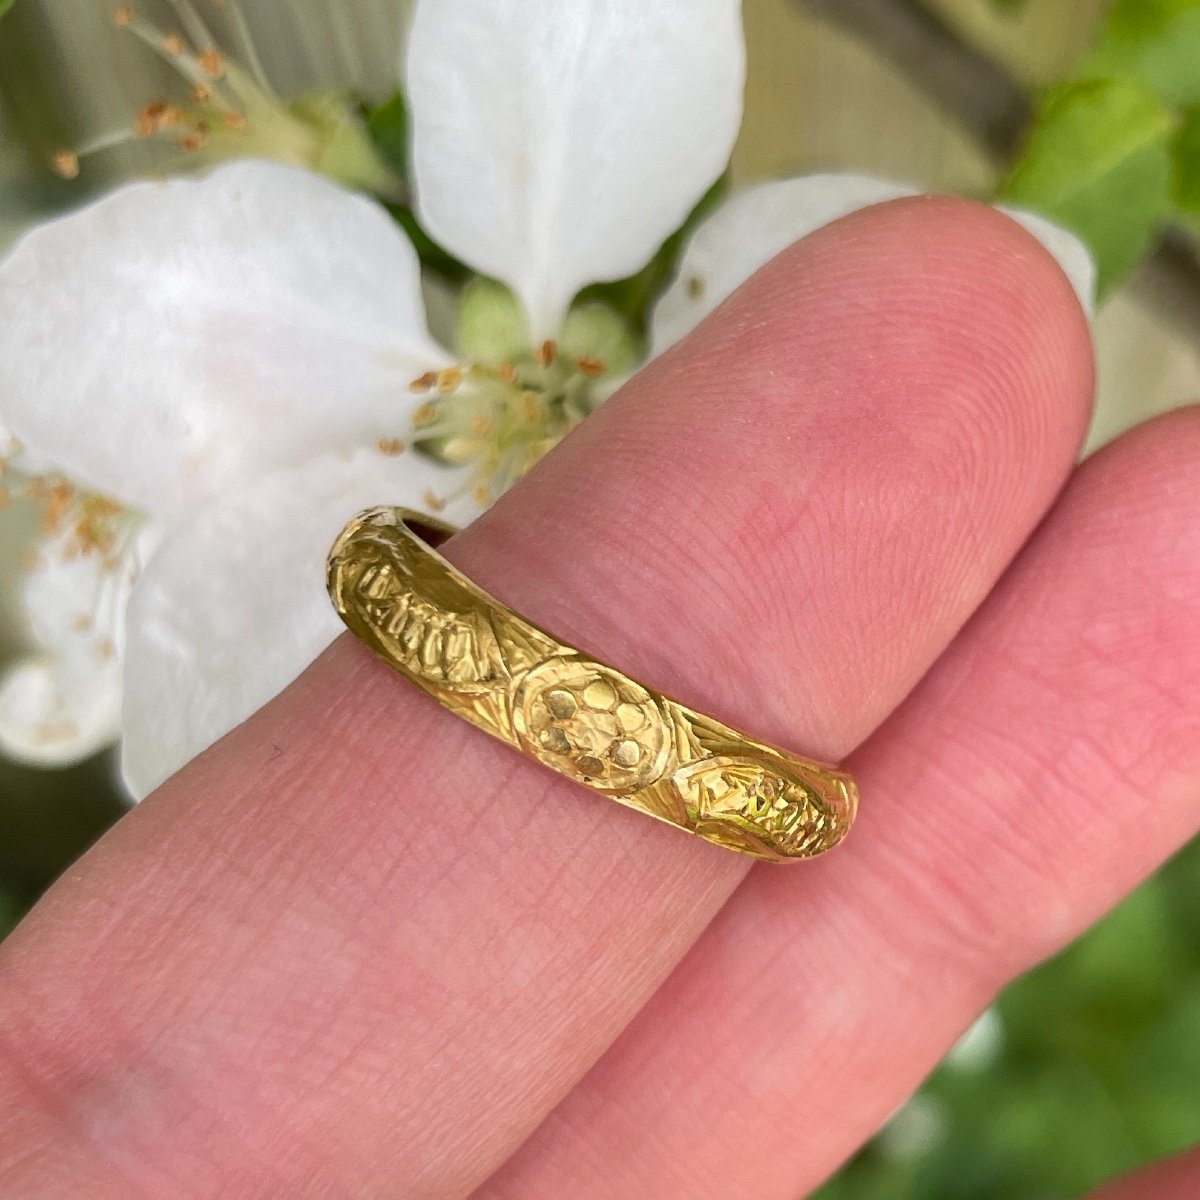 Gold Posy Ring Engraved With Black Letter. Probably English, 15th Century.-photo-3